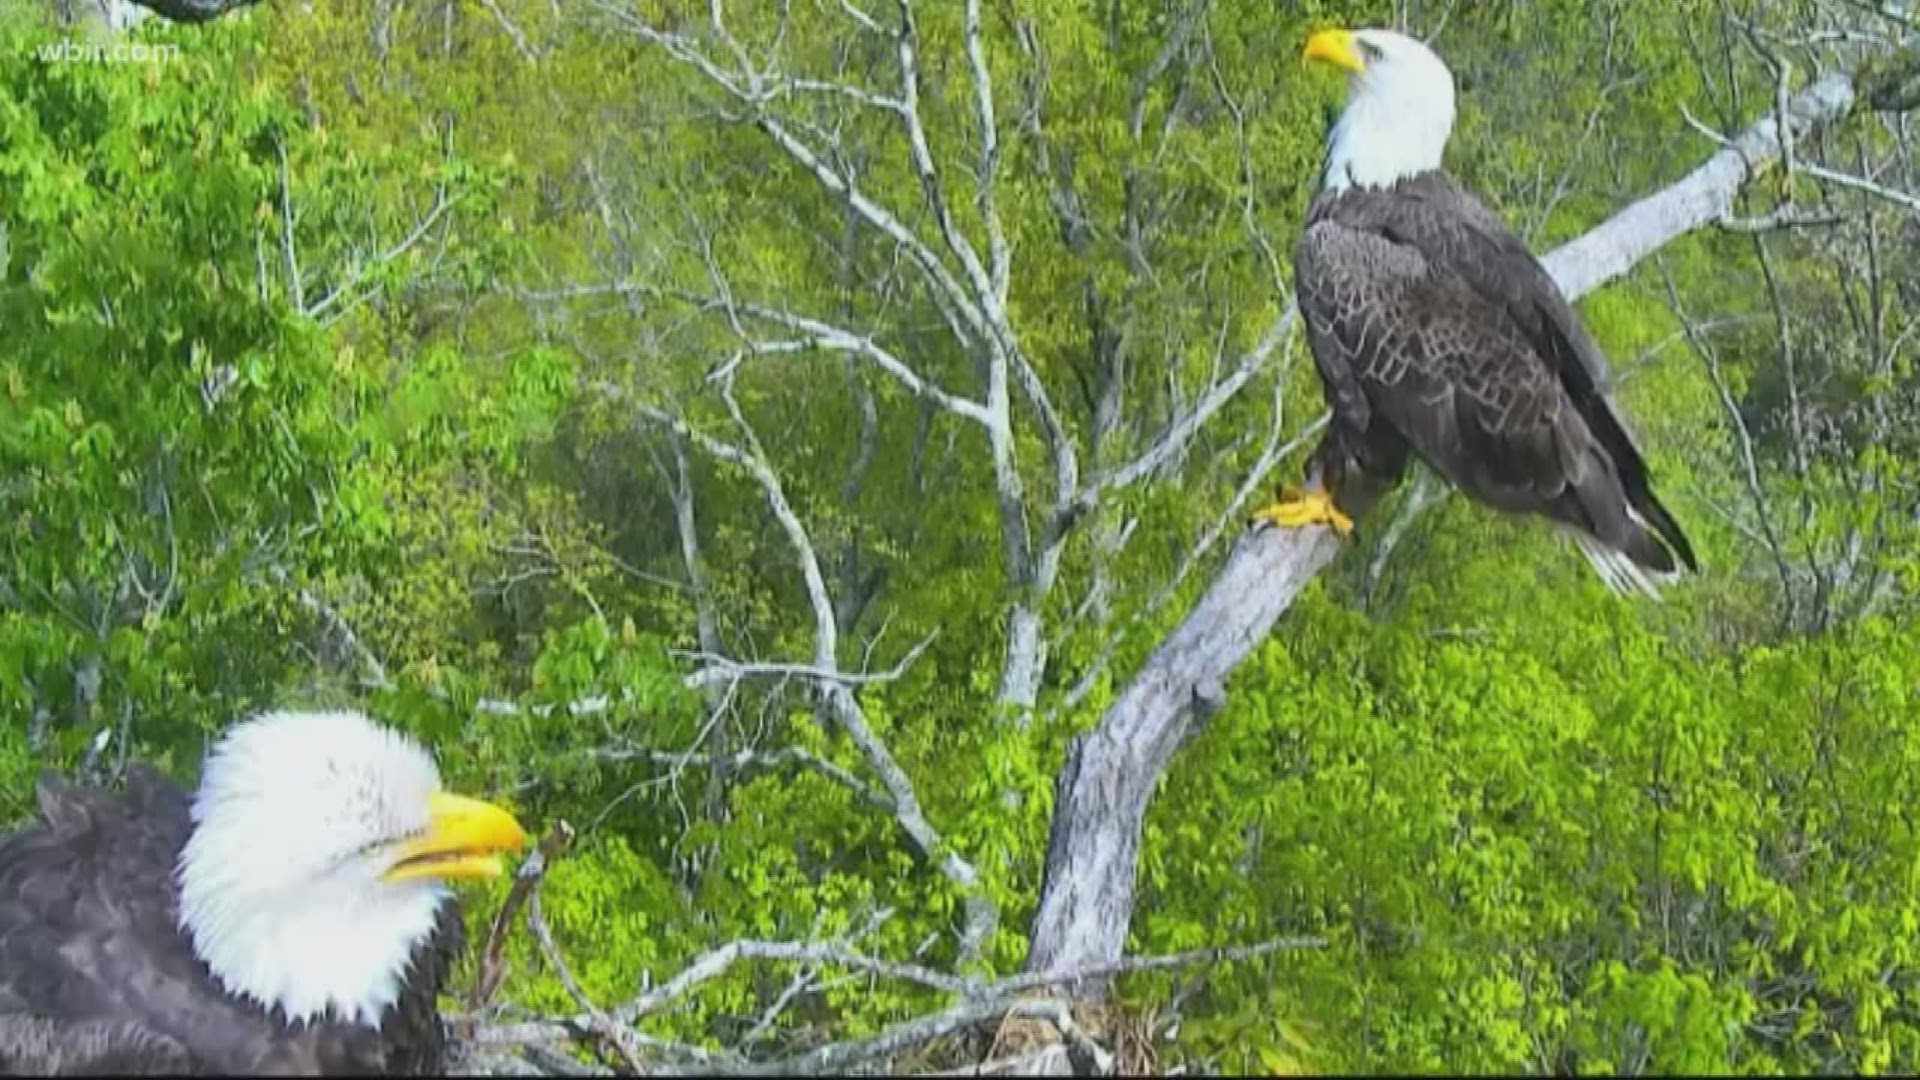 Two bald eagles rehabilitated and released years apart  manage to find each other in the wild. May 9, 2018-4pm